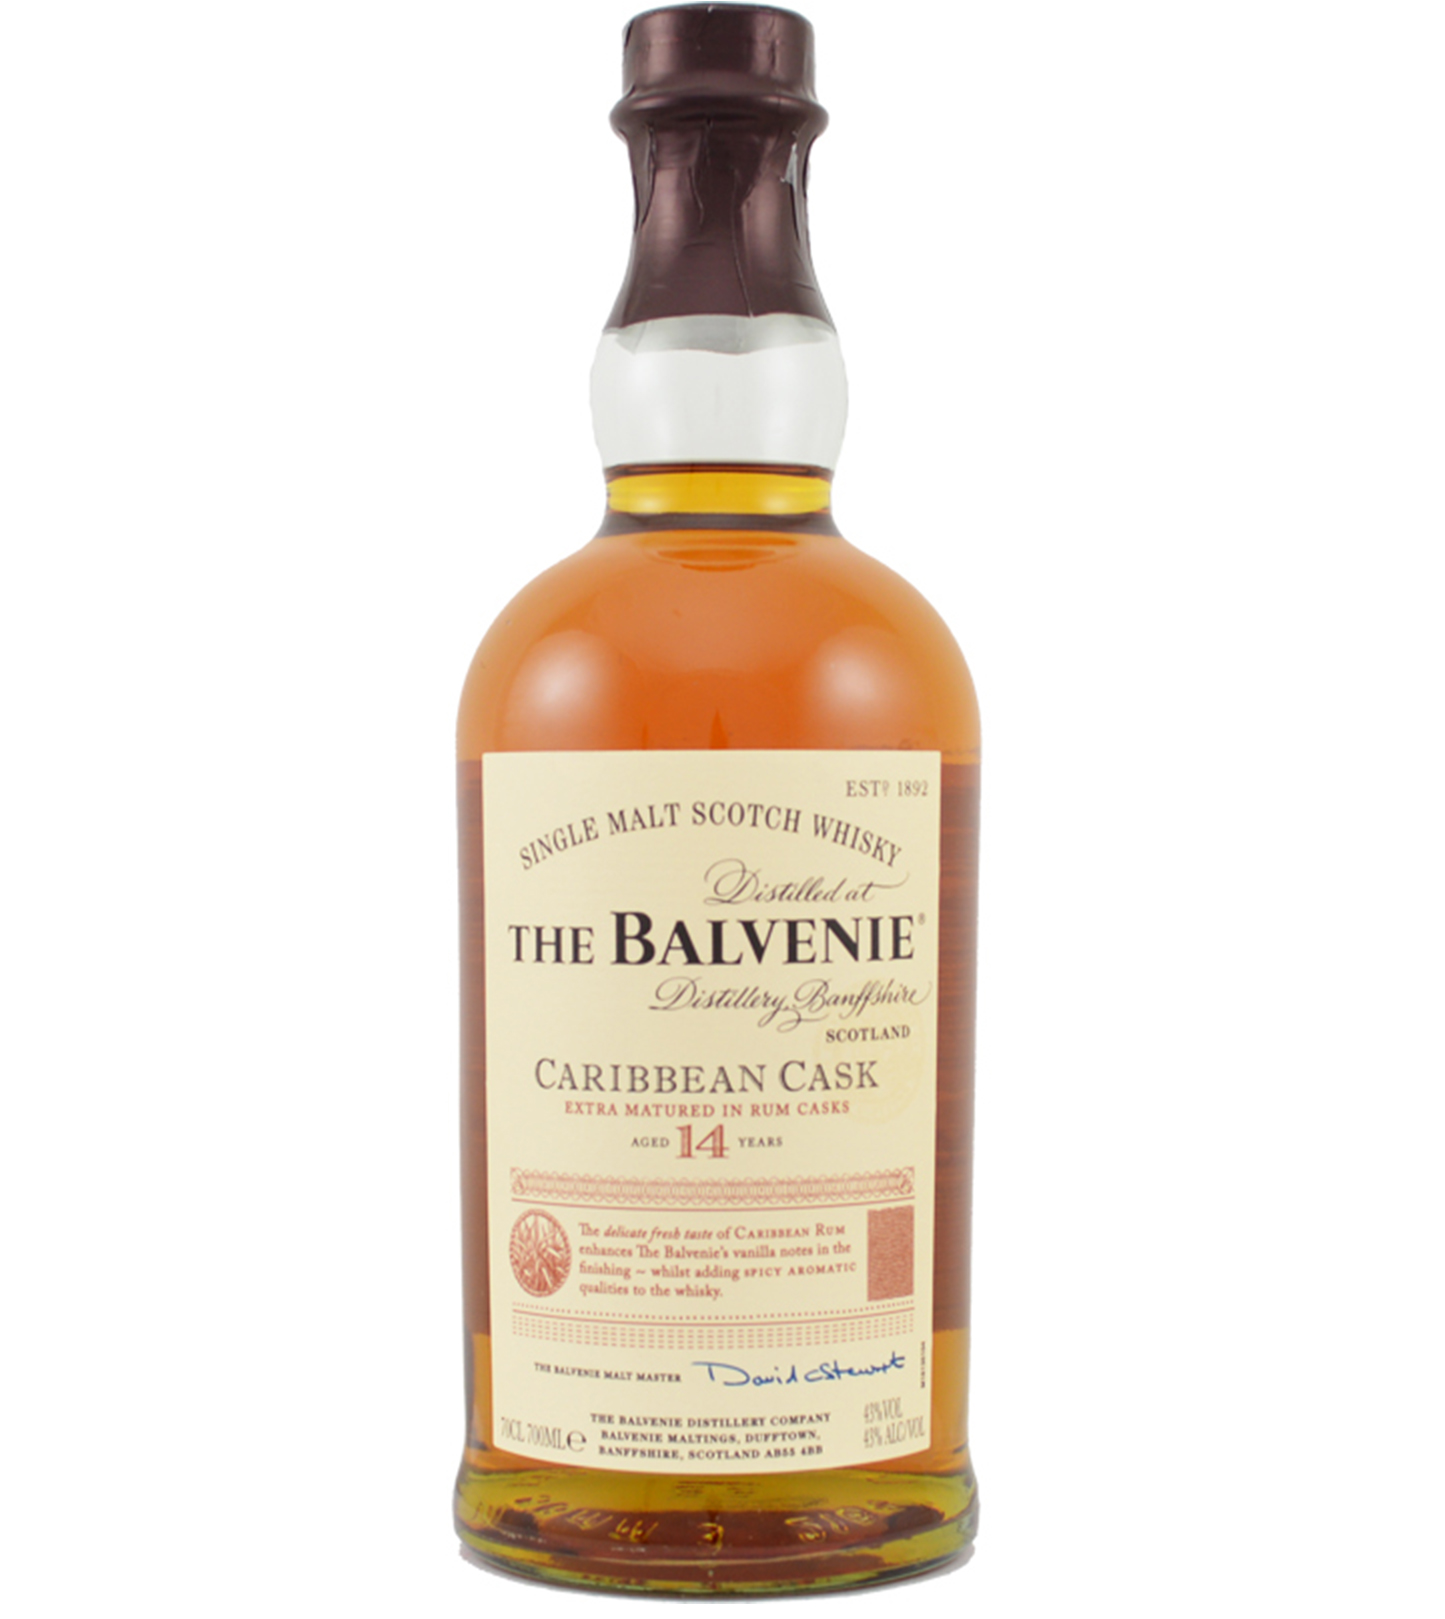 You are currently viewing Balvenie 14 years Caribbean Cask